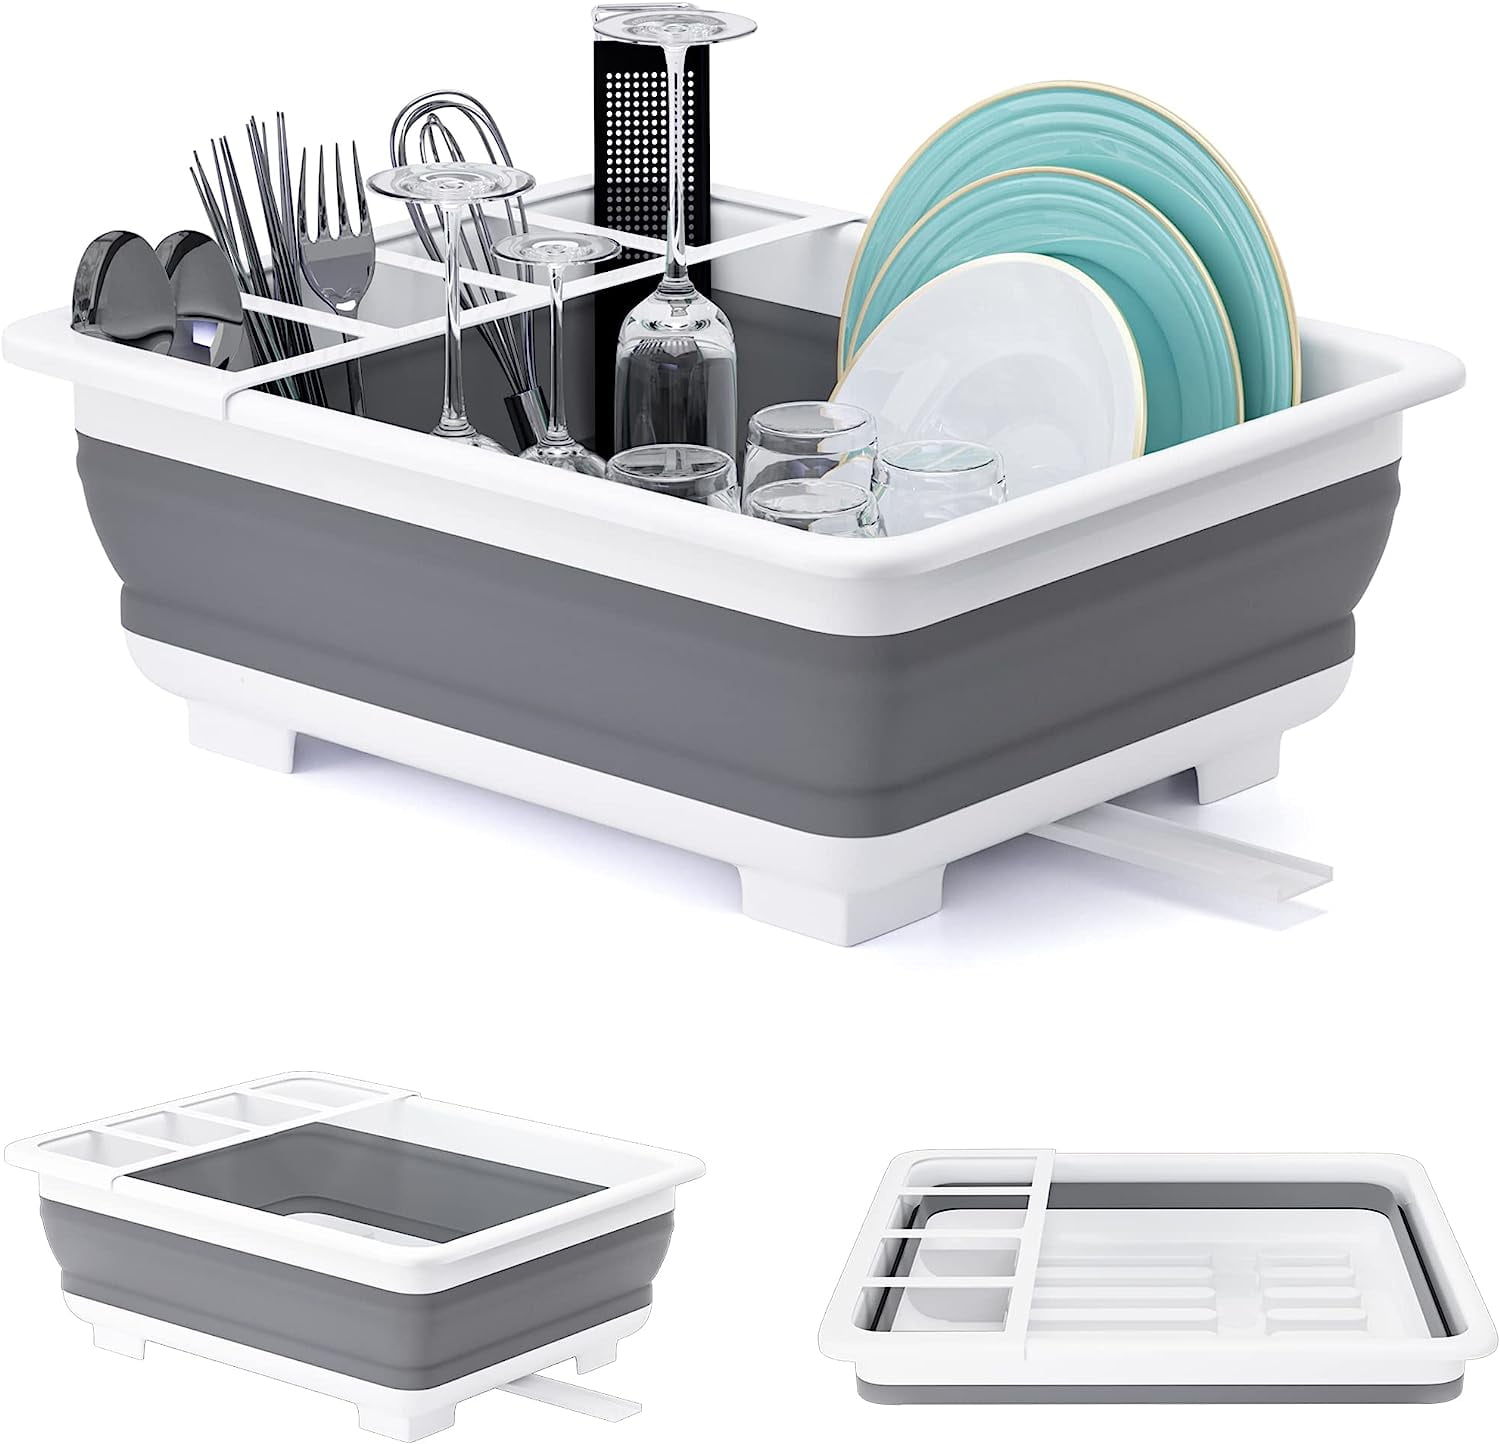 Outdoor Camping Gear Countertop Dish Rack Set with Sponge Drying